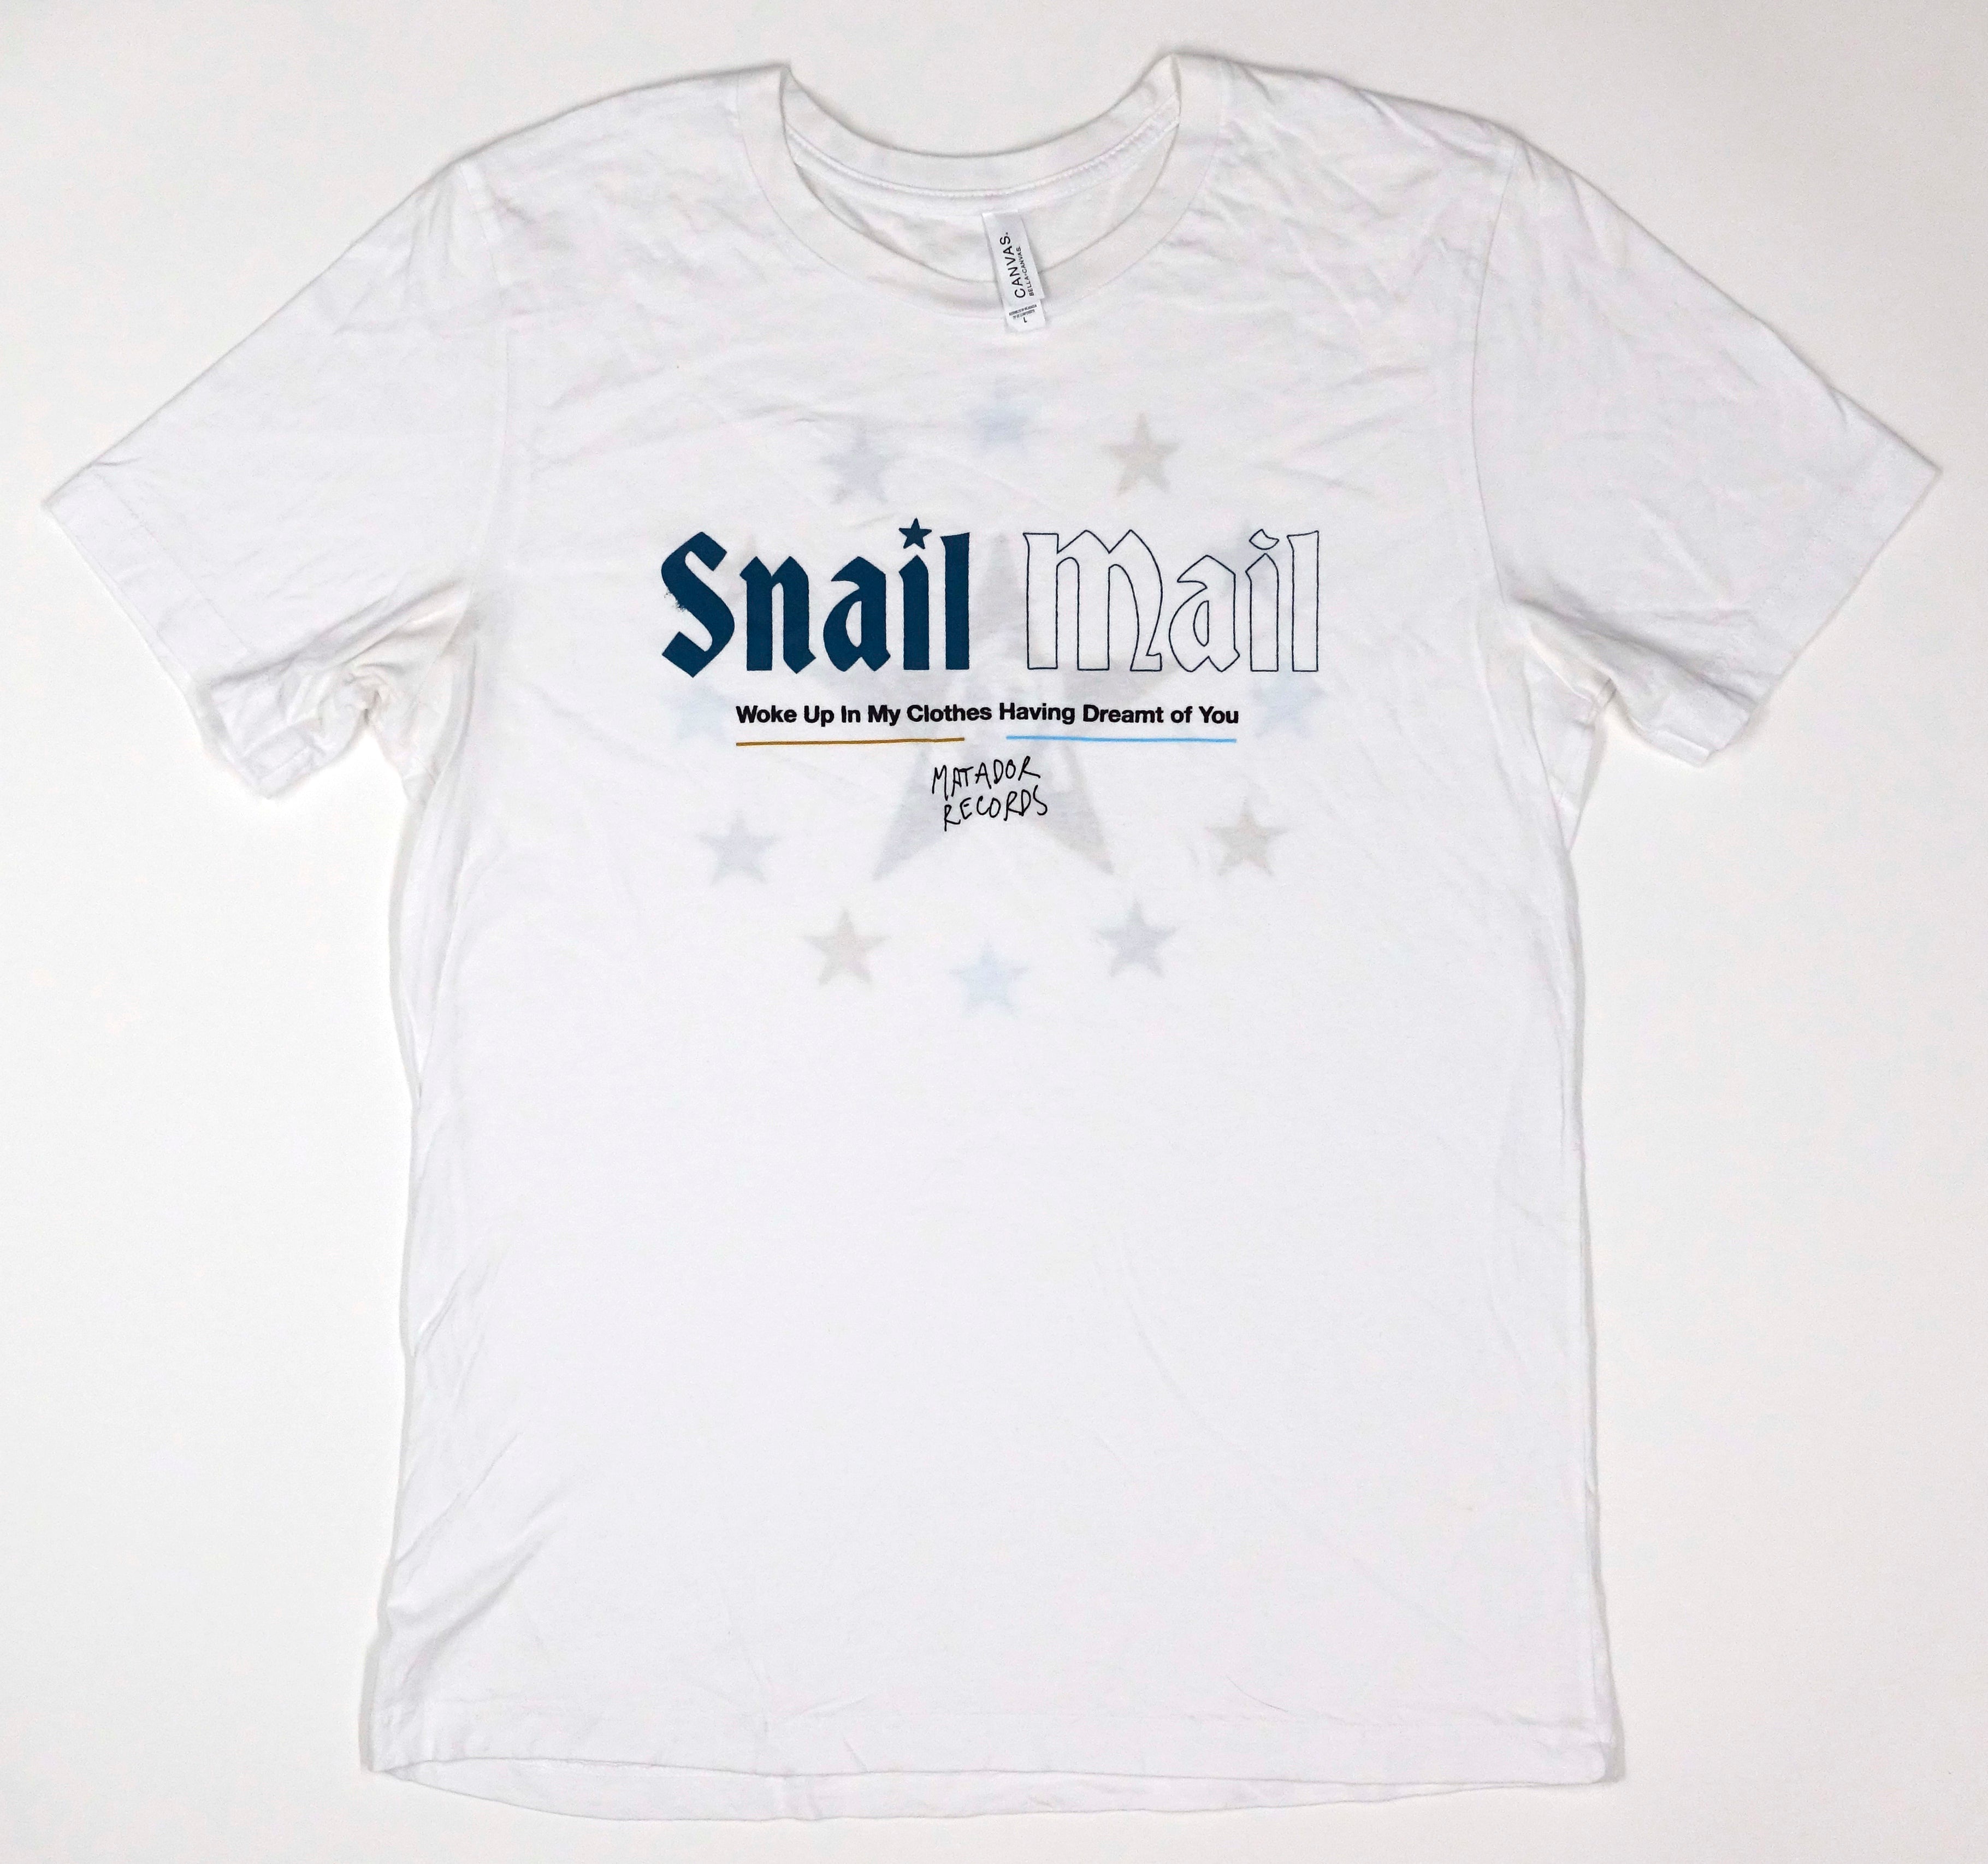 Snail Mail - Woke Up In My Clothes Having Dreamt Of You 2019 Tour Shirt Size Large